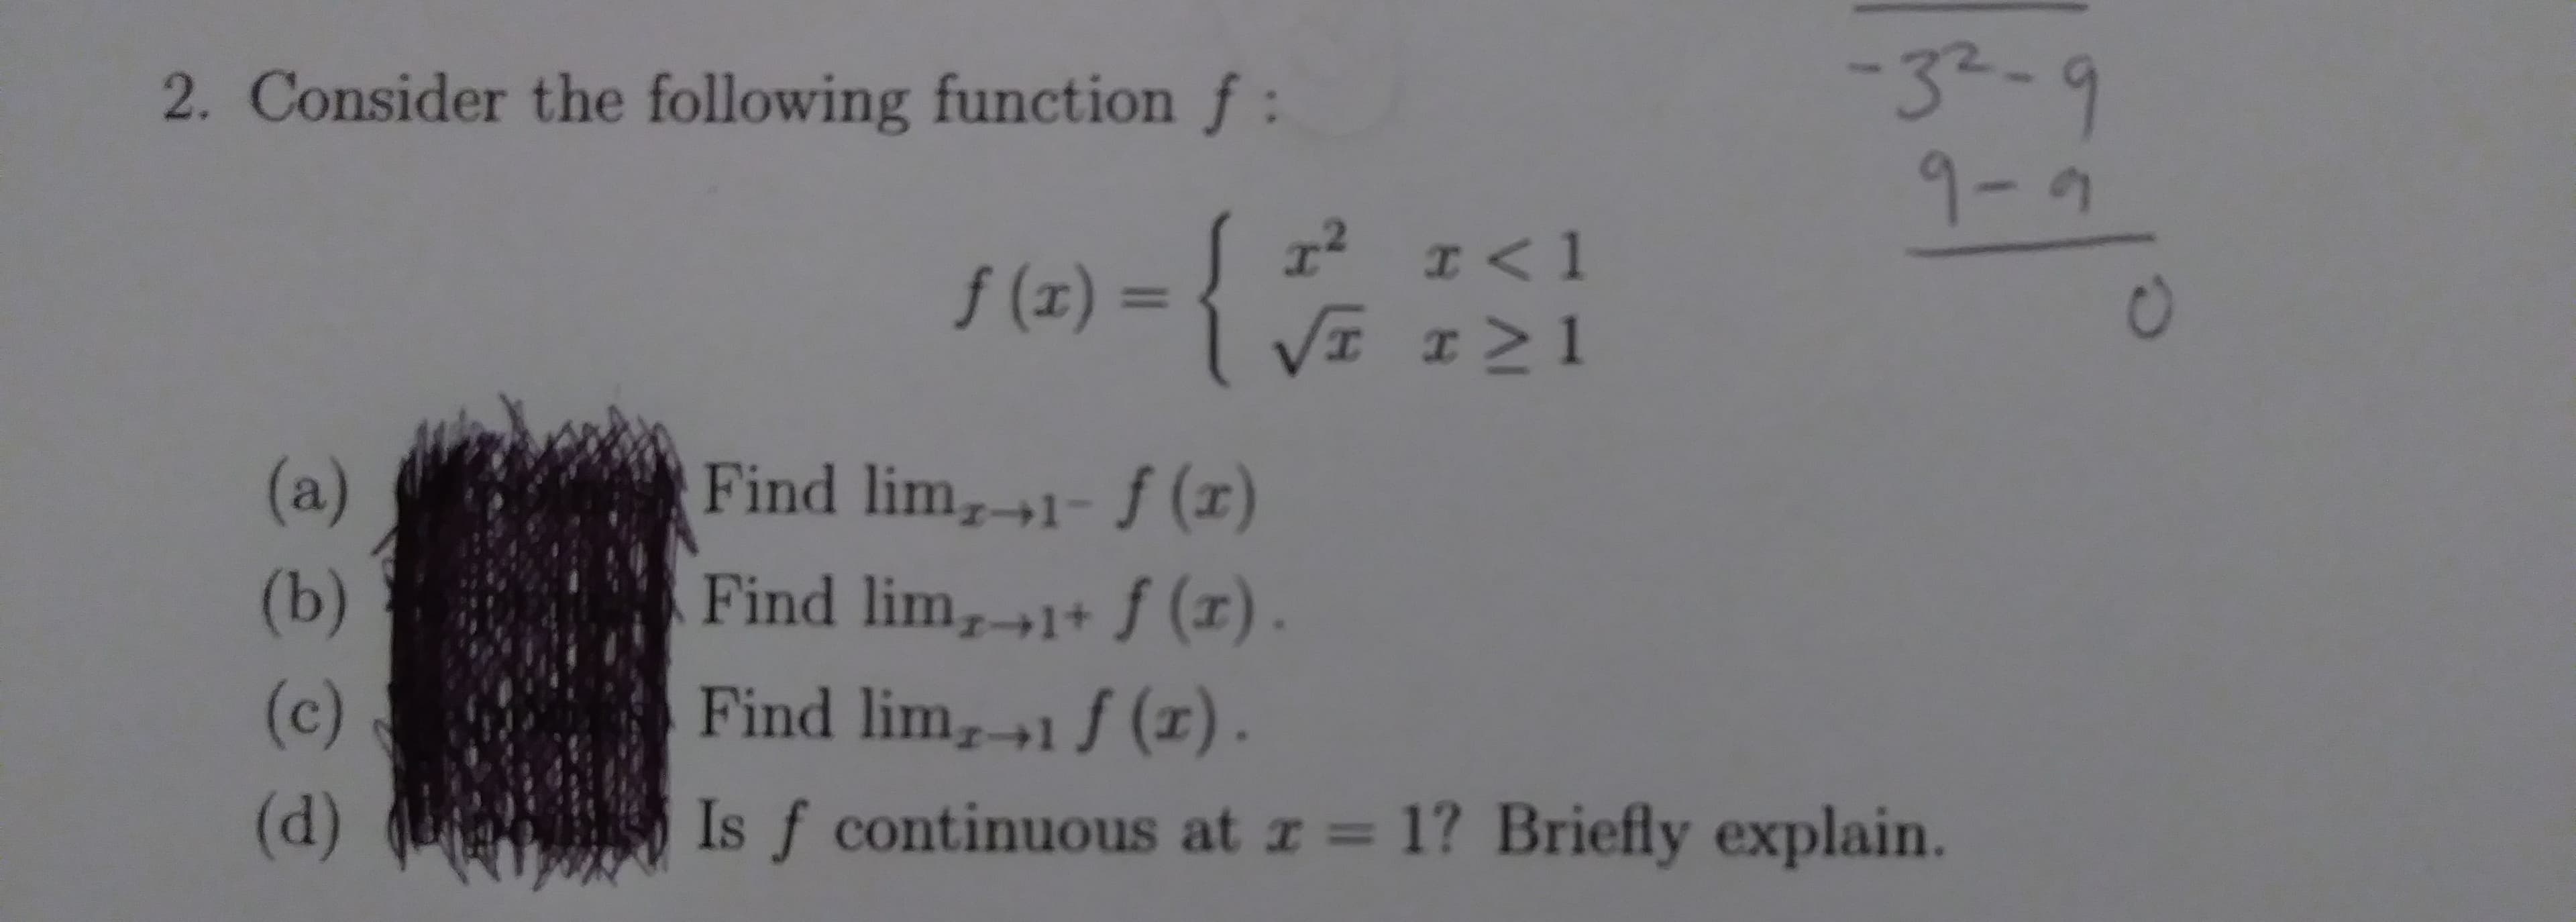 -32-9
9-4
2. Consider the following function f:
r2 r< 1
f (x) =
Find lim,1-f (x)
(a)
(b)
Find lim,1+ f (x) .
Find lim
(c)
1f (1).
(d)
1? Briefly explain.
Is f continuous at r
